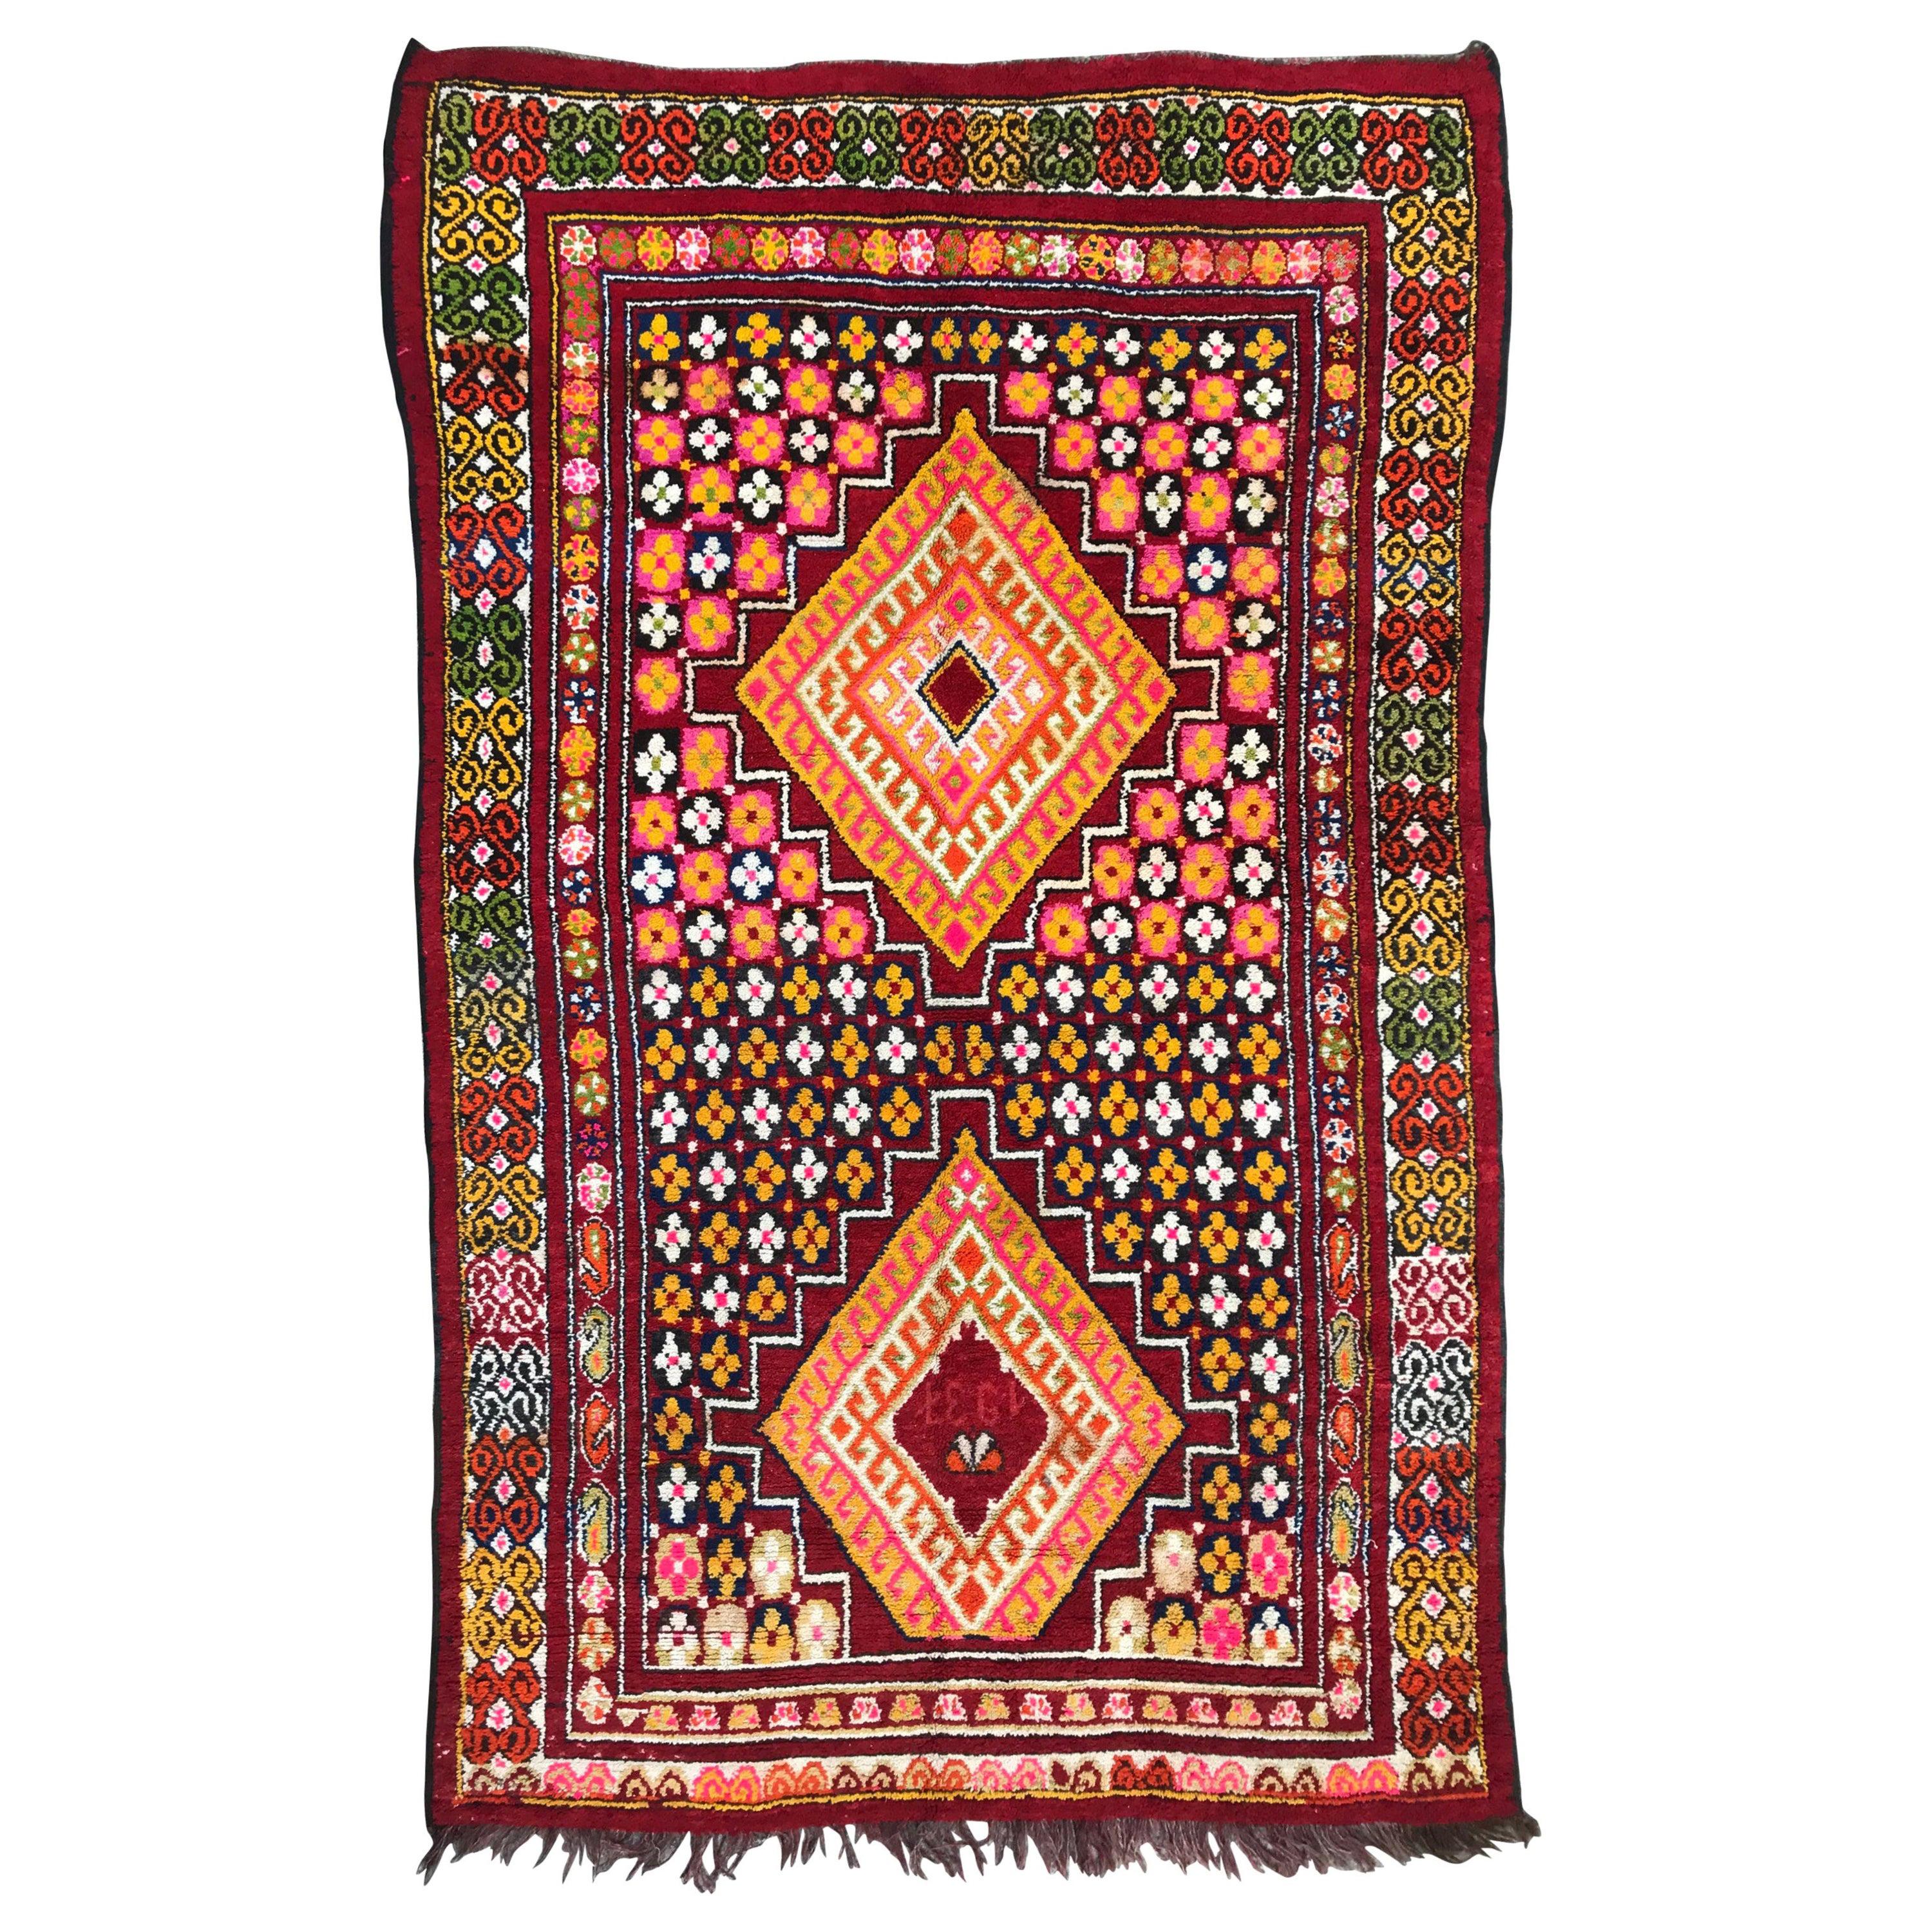 Bobyrug’s Very Beautiful Moroccan Berbere Colorful Rug For Sale